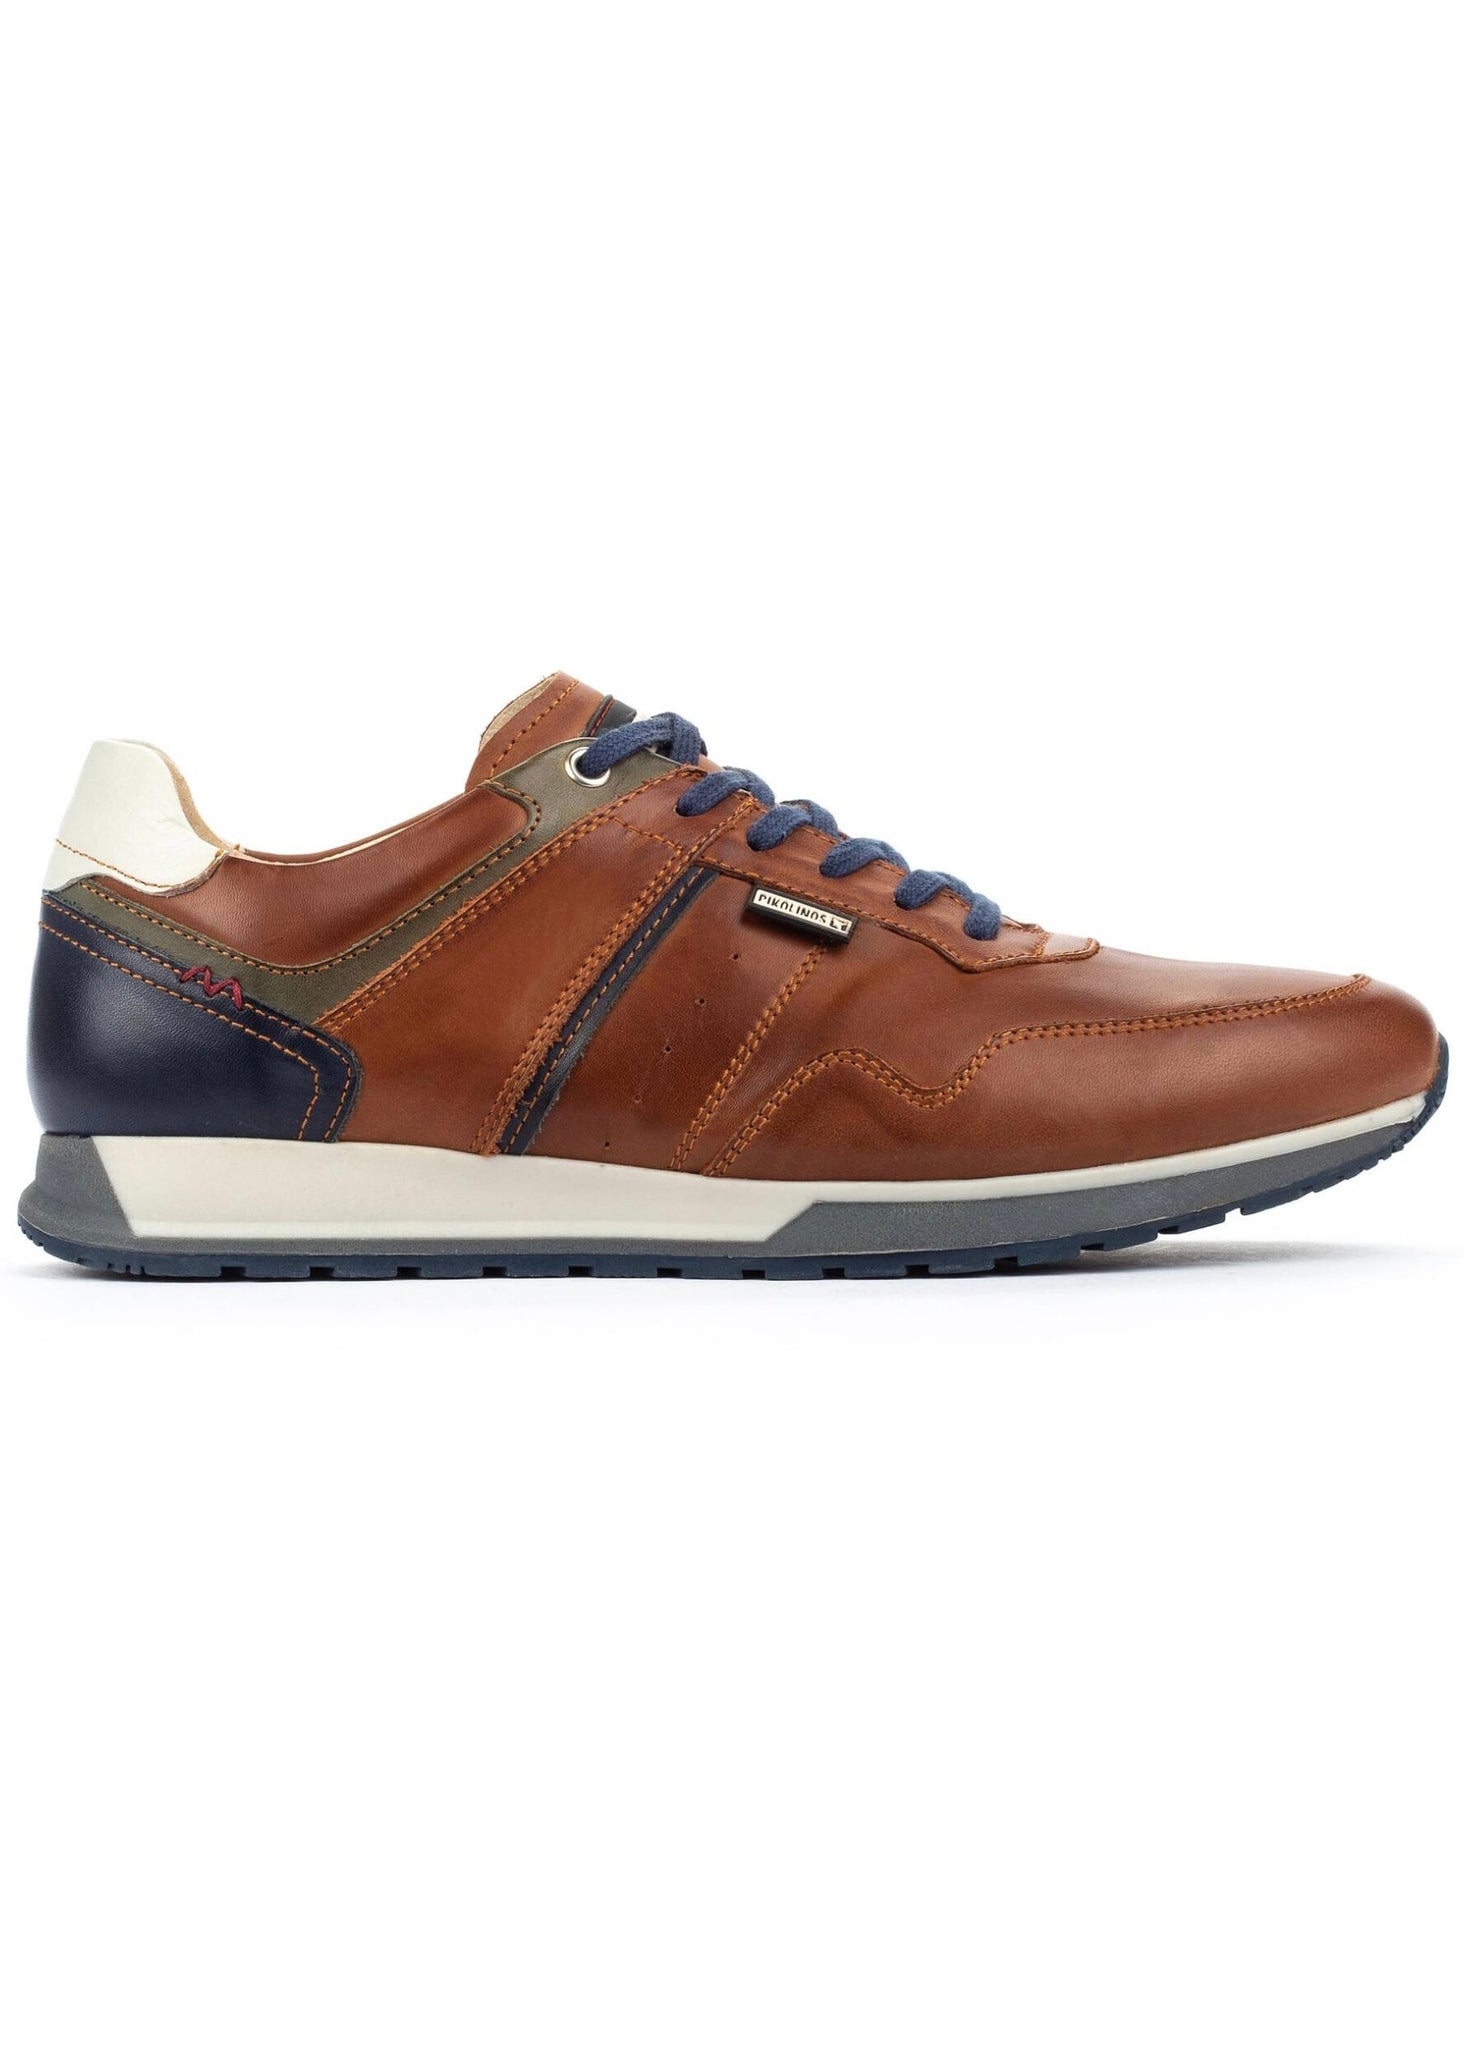 Pikolinos Cambil Men's Lace Up Sneaker